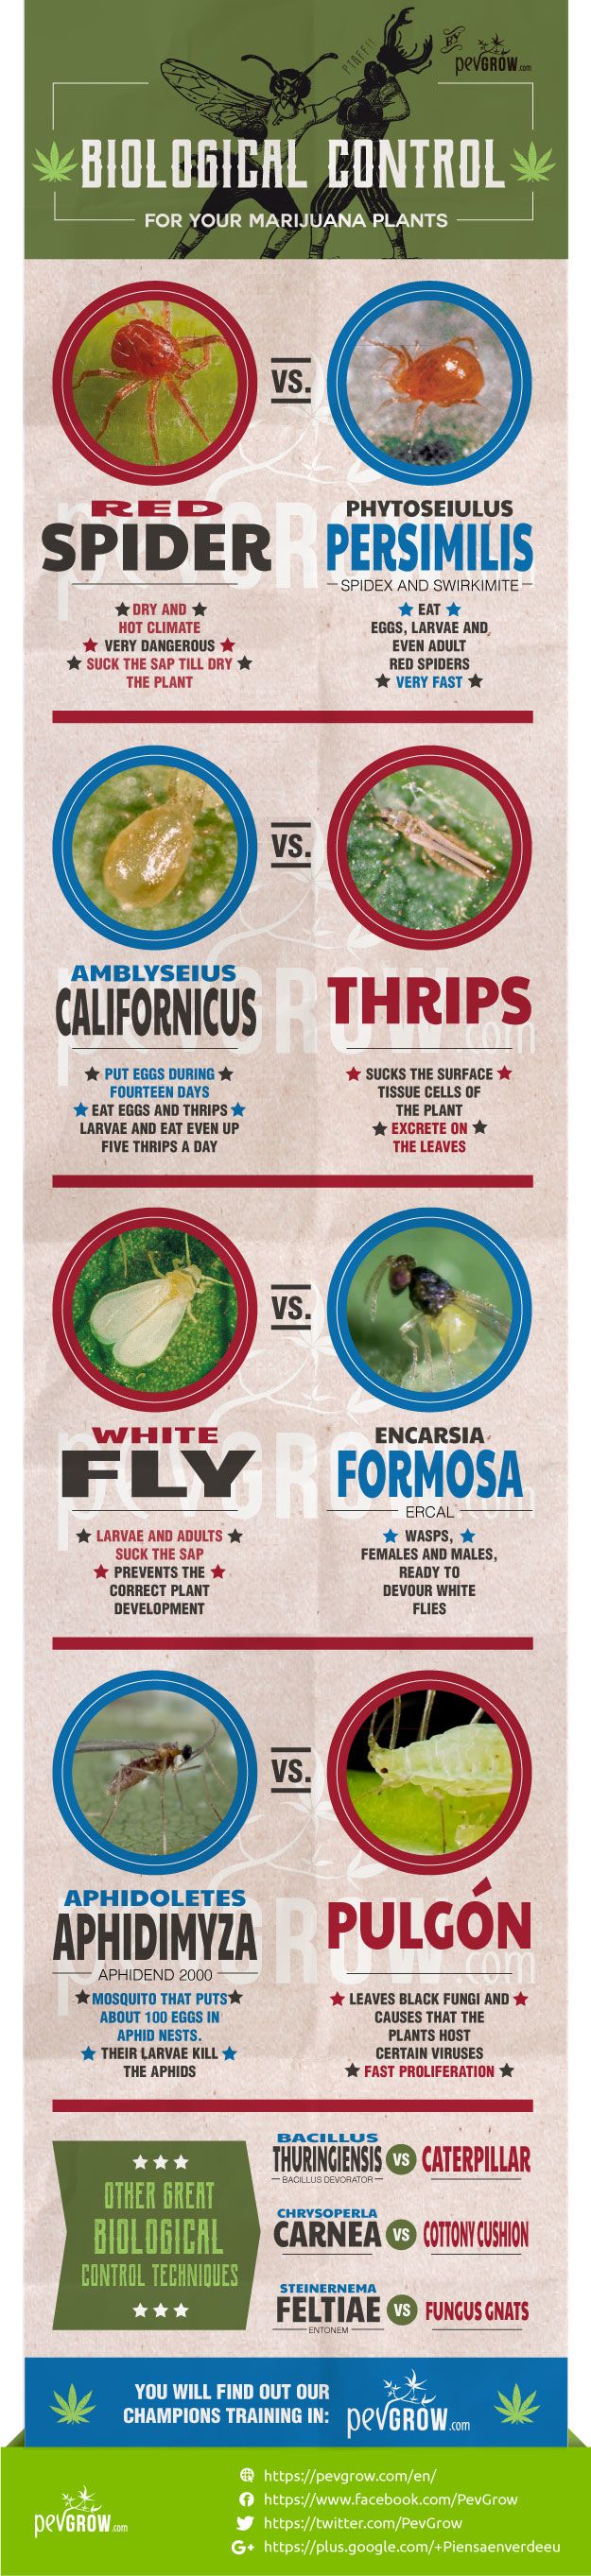 Infographic about the biological control techniques